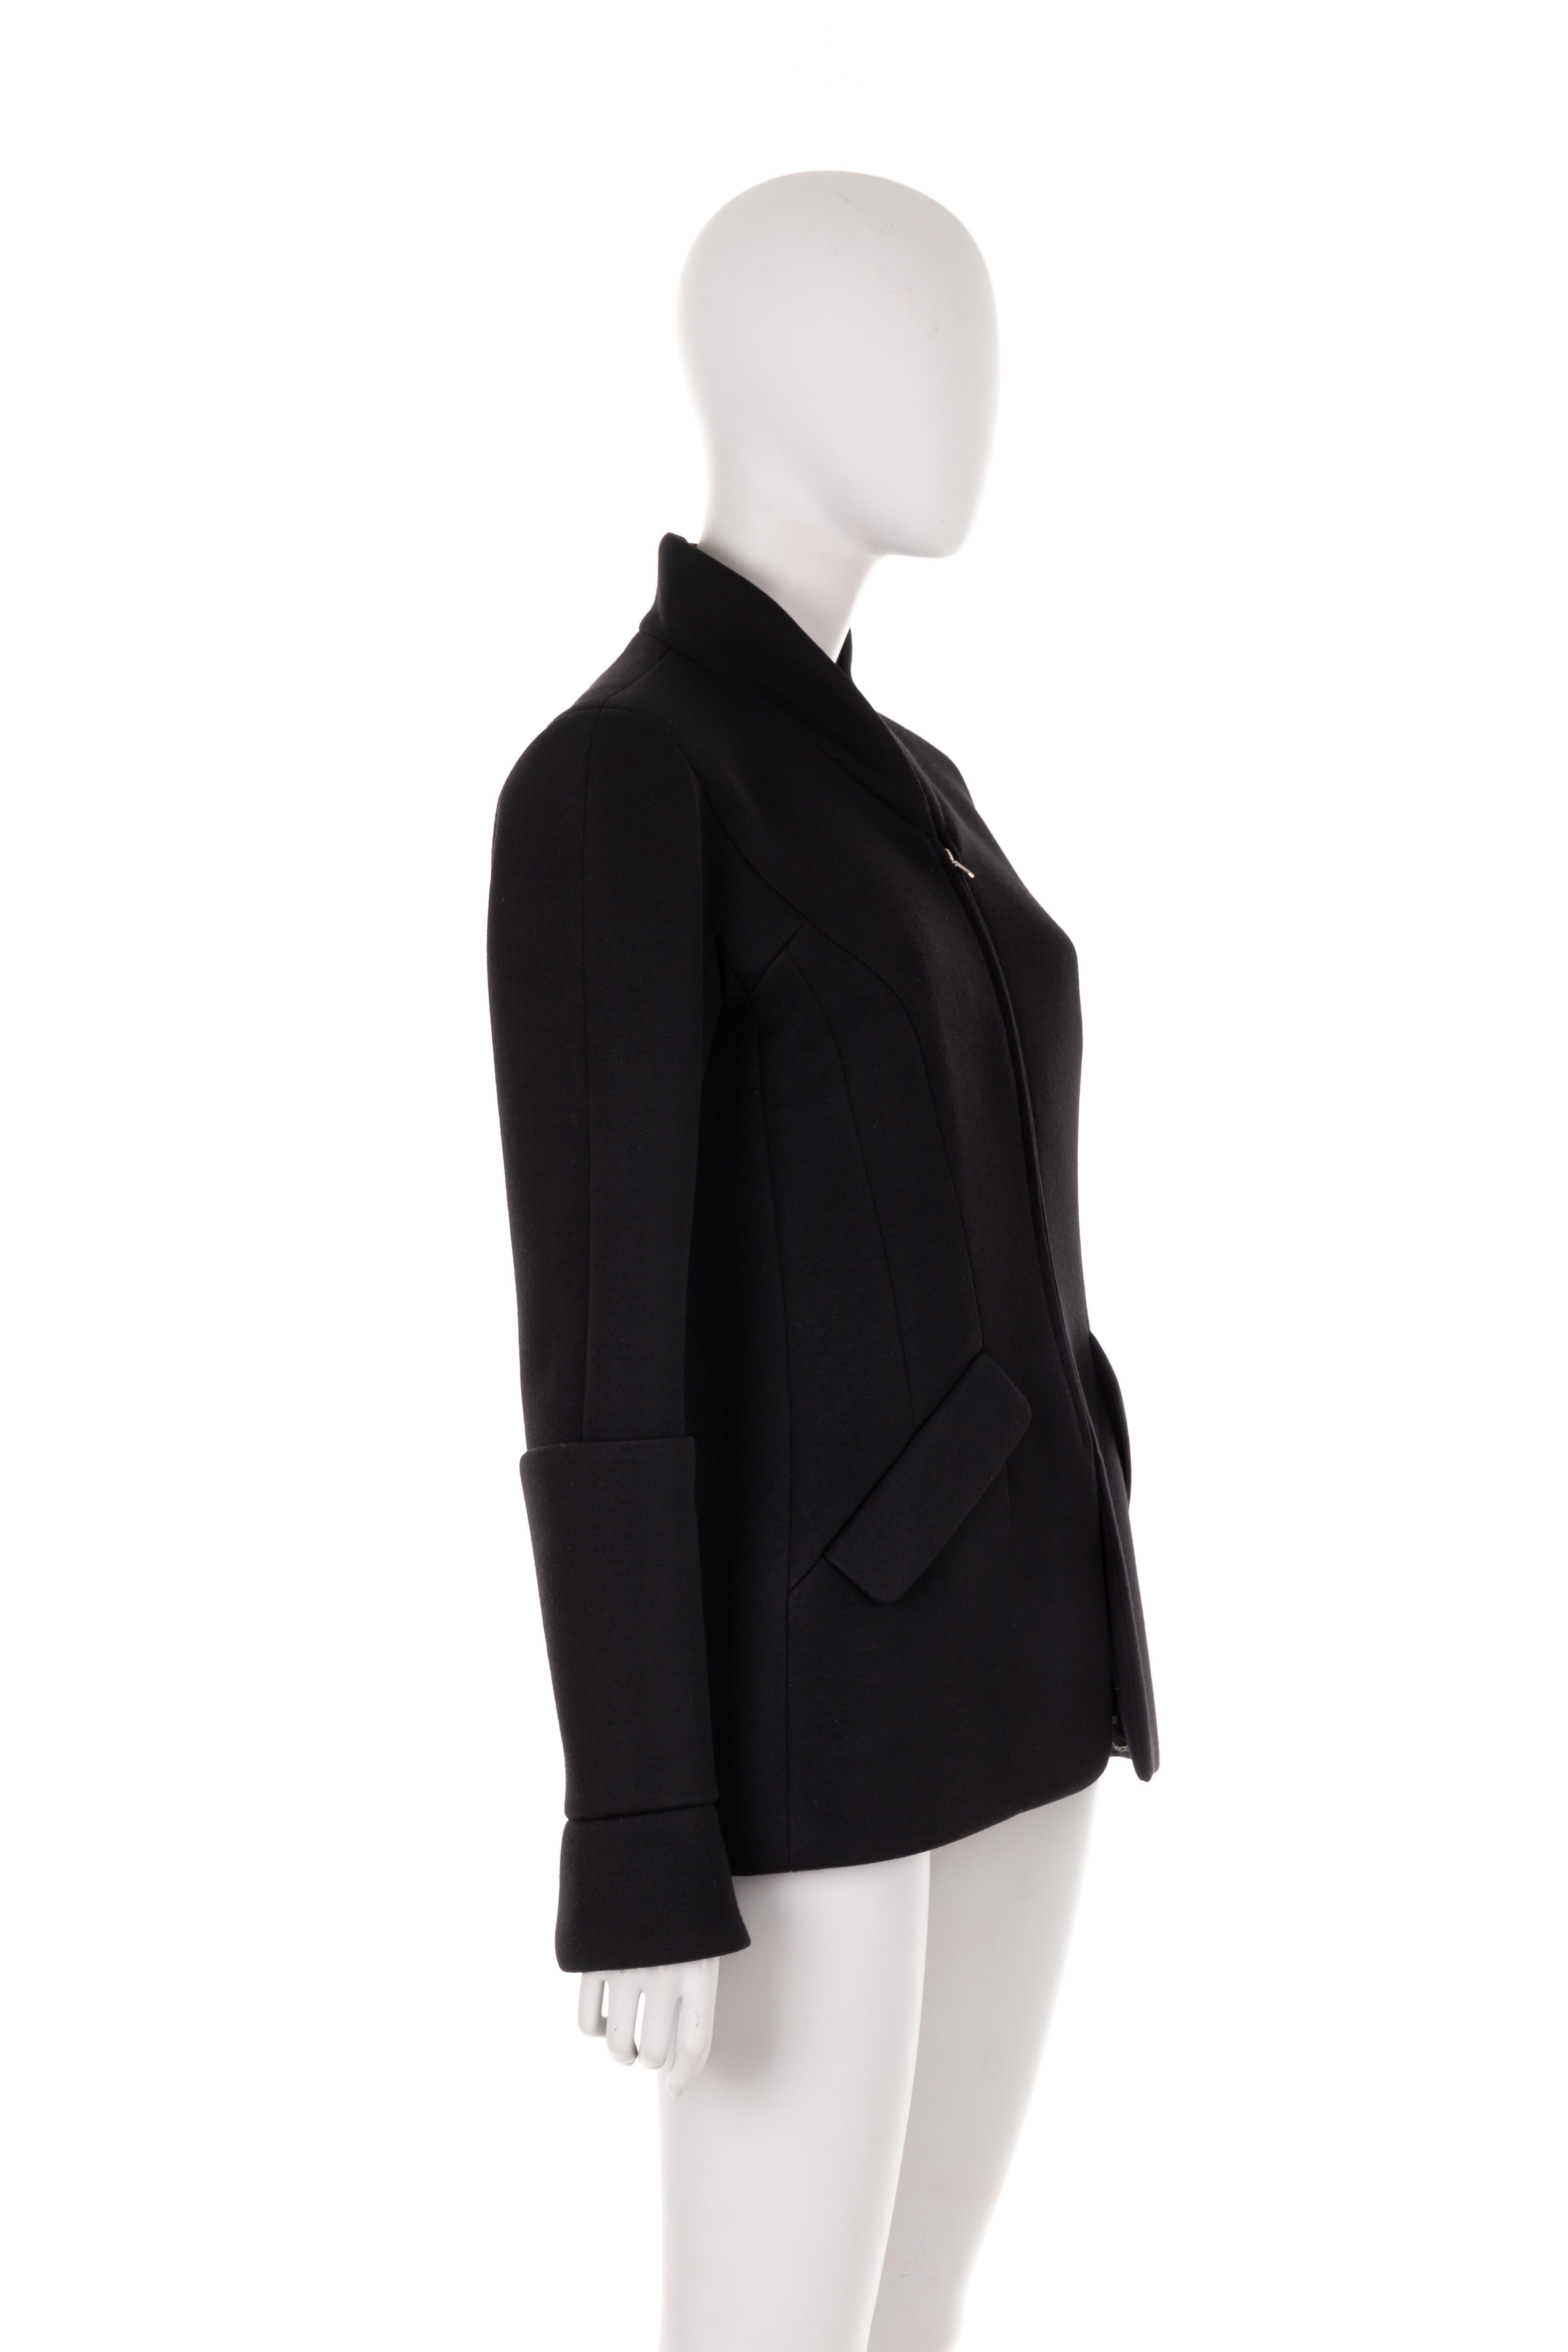 - Chanel by Karl Lagerfeld
- Sold by Gold Palms Vintage
- Fall Winter 2009 collection
- Black wool/nylon blend long sleeve jacket
- High collar
- Deep rolled up cuffs
- Front hip welted pockets
- Front and back zipper closure
- Size: 40

Shoulder to